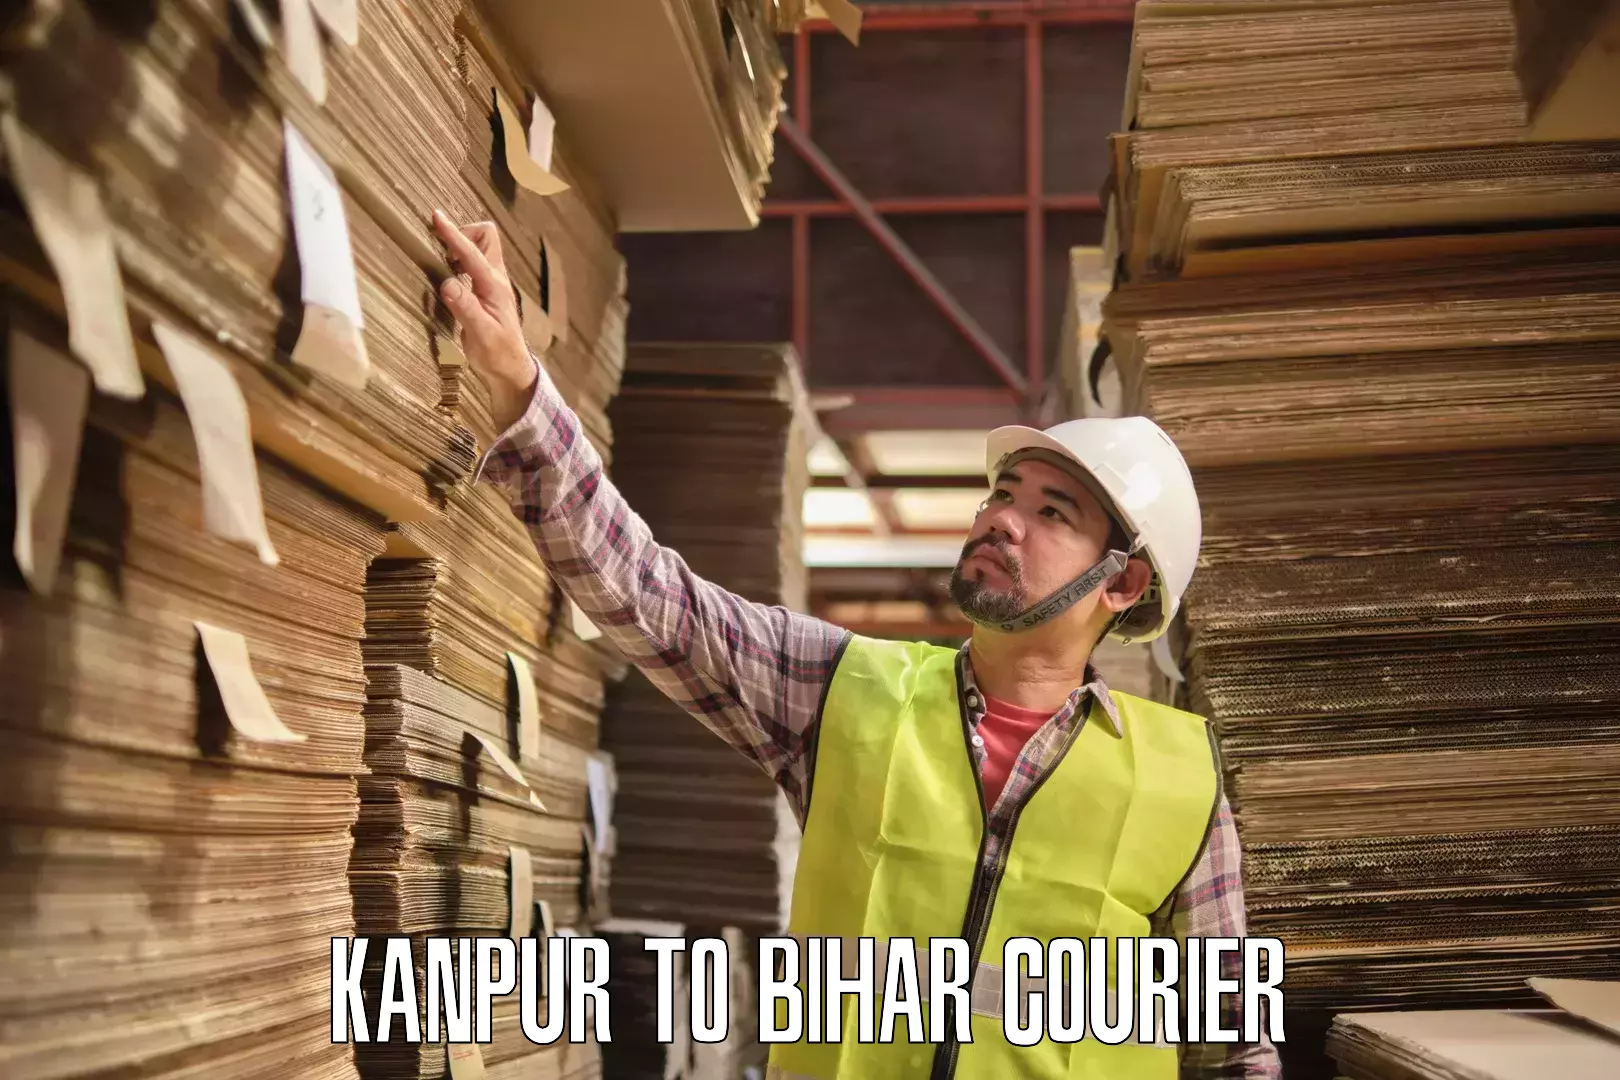 Courier service innovation Kanpur to Rajpur